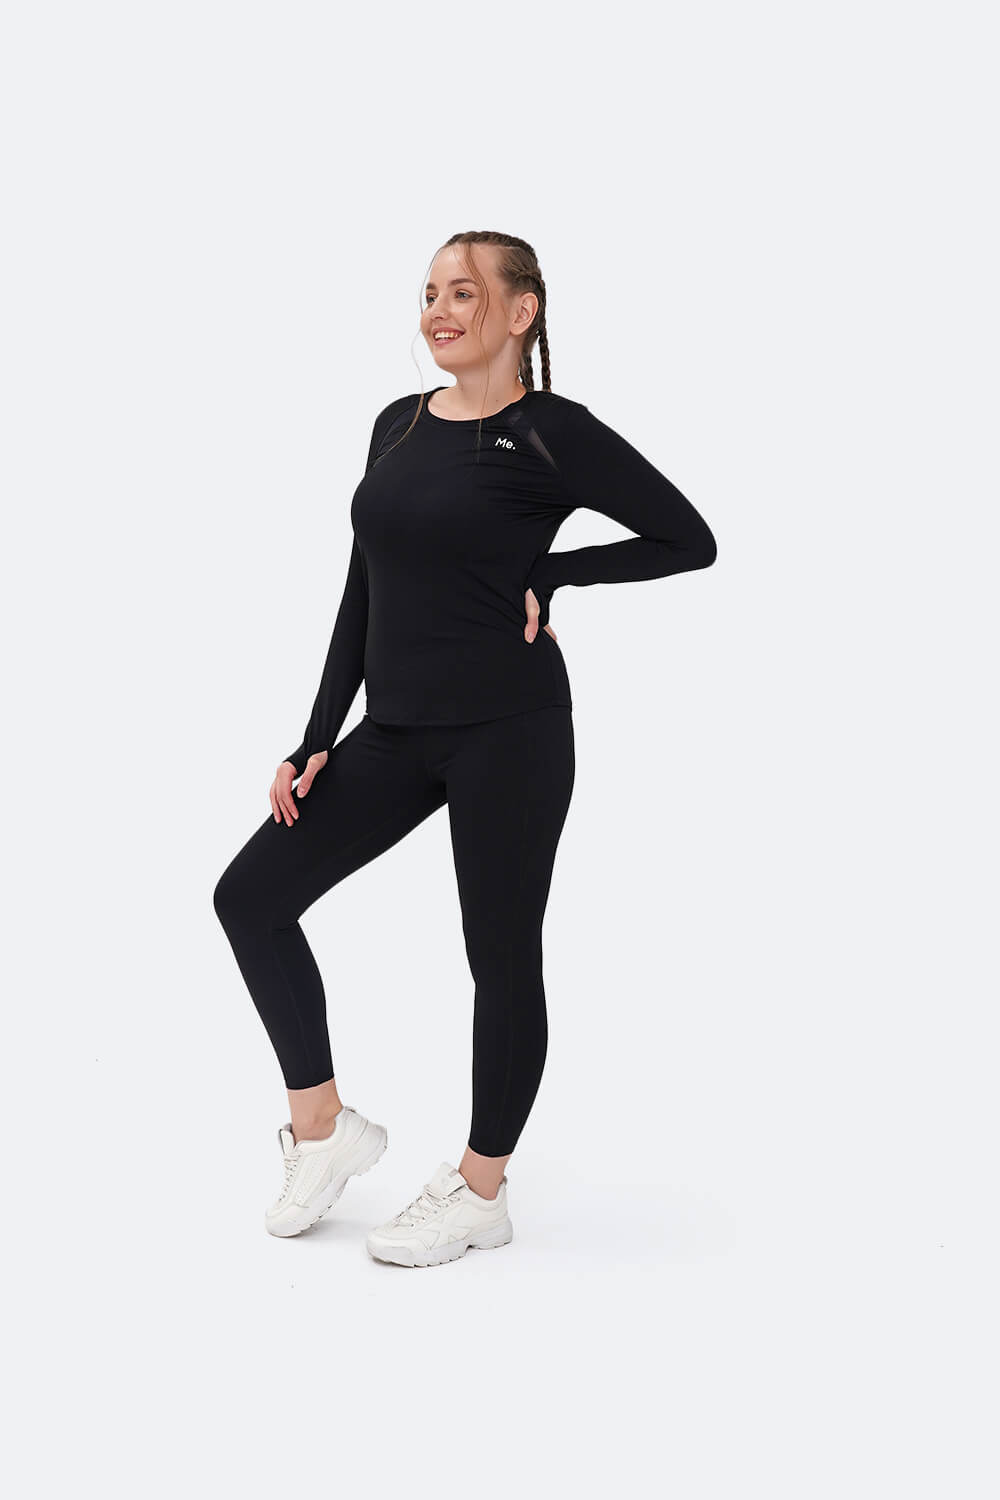 BetterMe High Waisted Slimming Leggings and Long Sleeve Top with